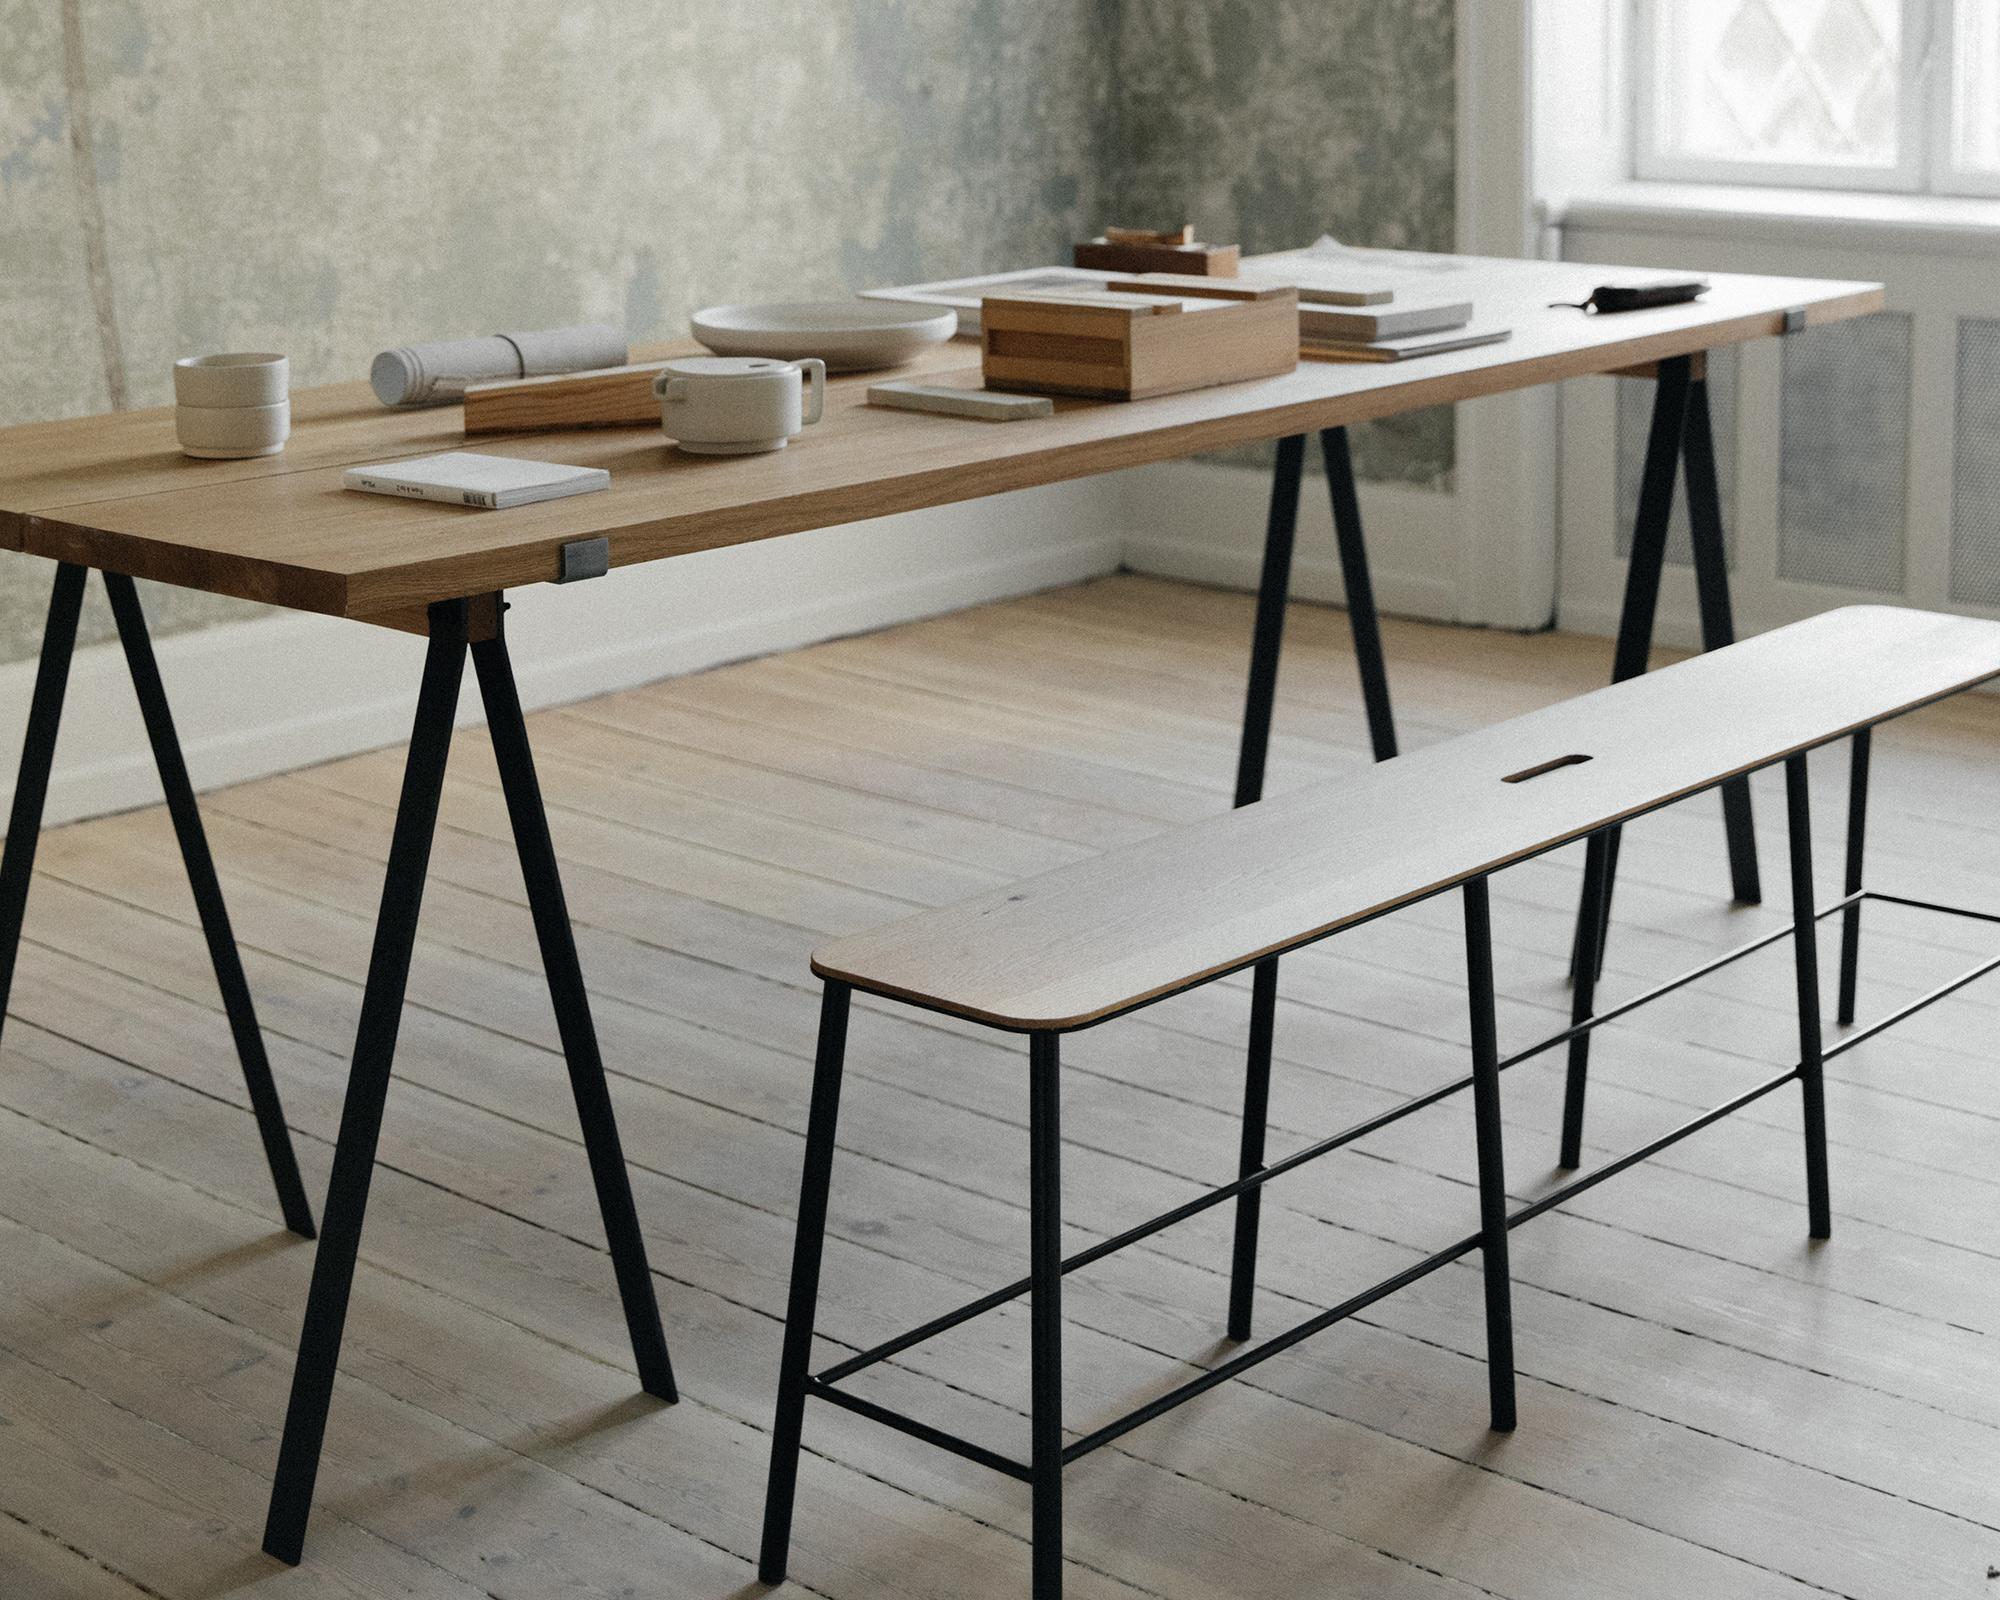 Adam bench is inspired by industrial design, an artist's studio, and a workshop. The functionality and simplicity of the design, combined with strong materials, gives this bench a structural and utilitarian approach.

Features
– Works well to seat